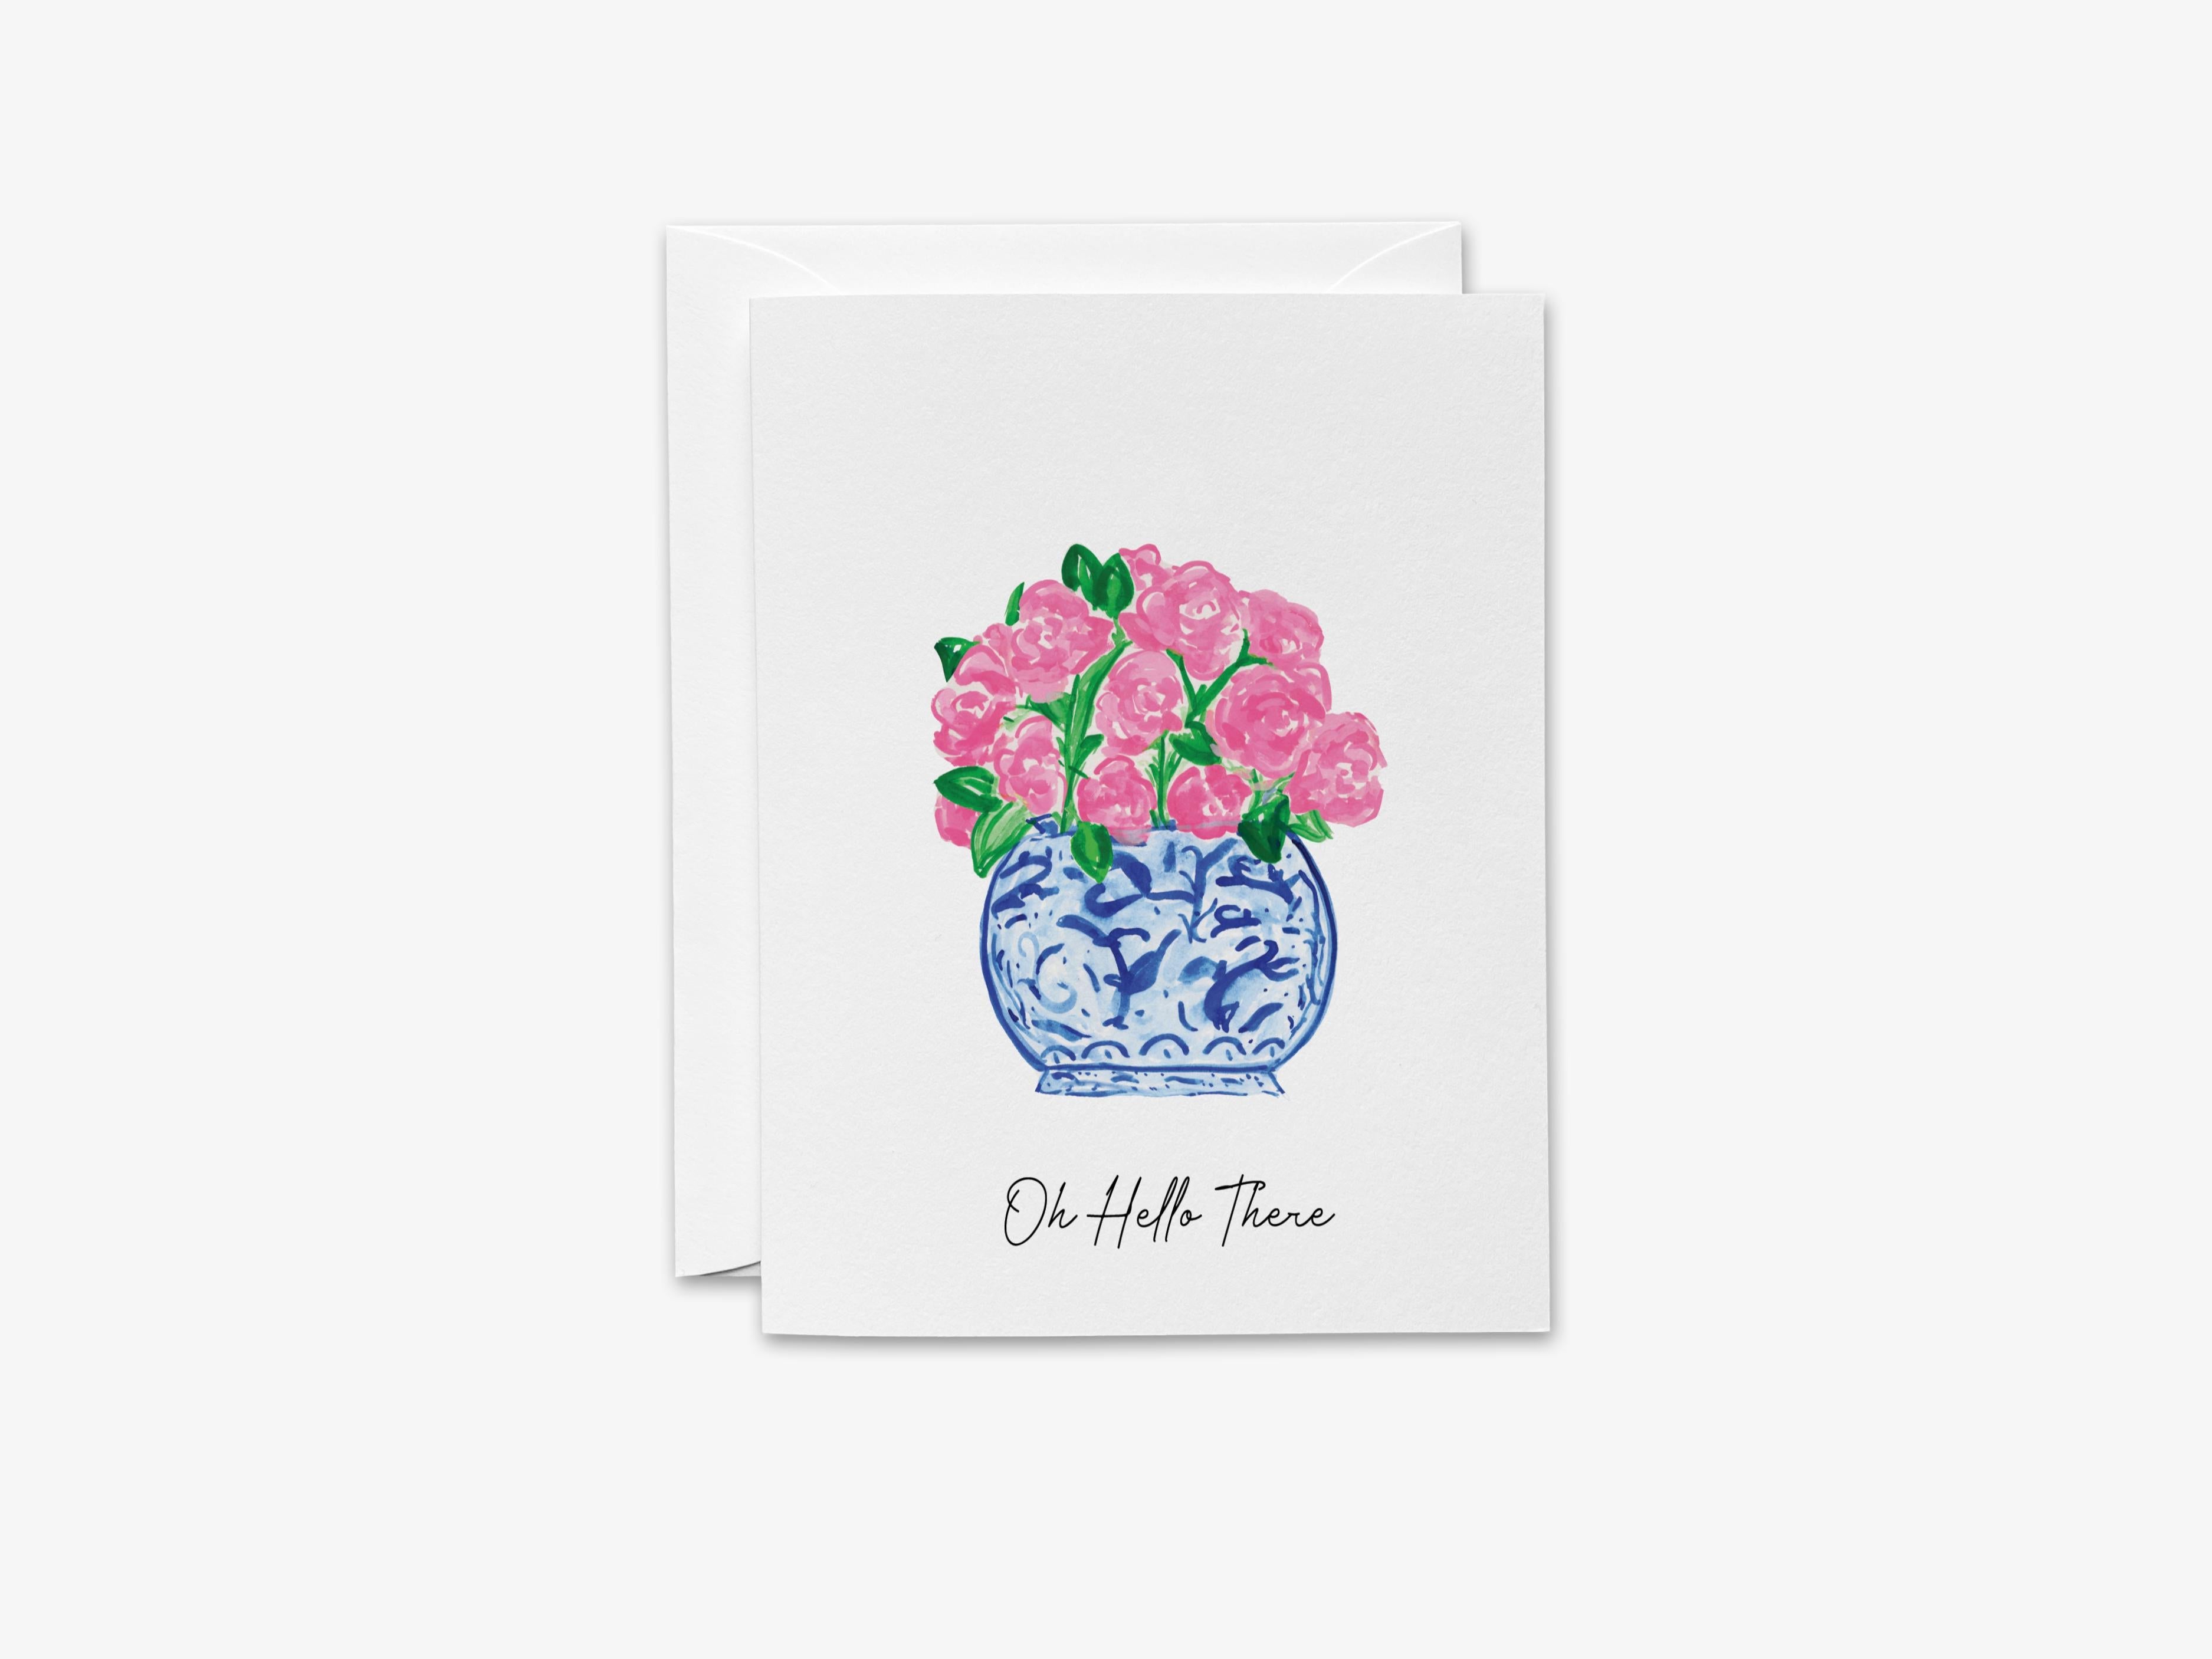 Peonies in Ginger Jar Greeting Card-These folded greeting cards are 4.25x5.5 and feature our hand-painted peonies and a ginger jar, printed in the USA on 100lb textured stock. They come with a White envelope and make a great thinking of you card for the chinoiserie lover in your life.-The Singing Little Bird